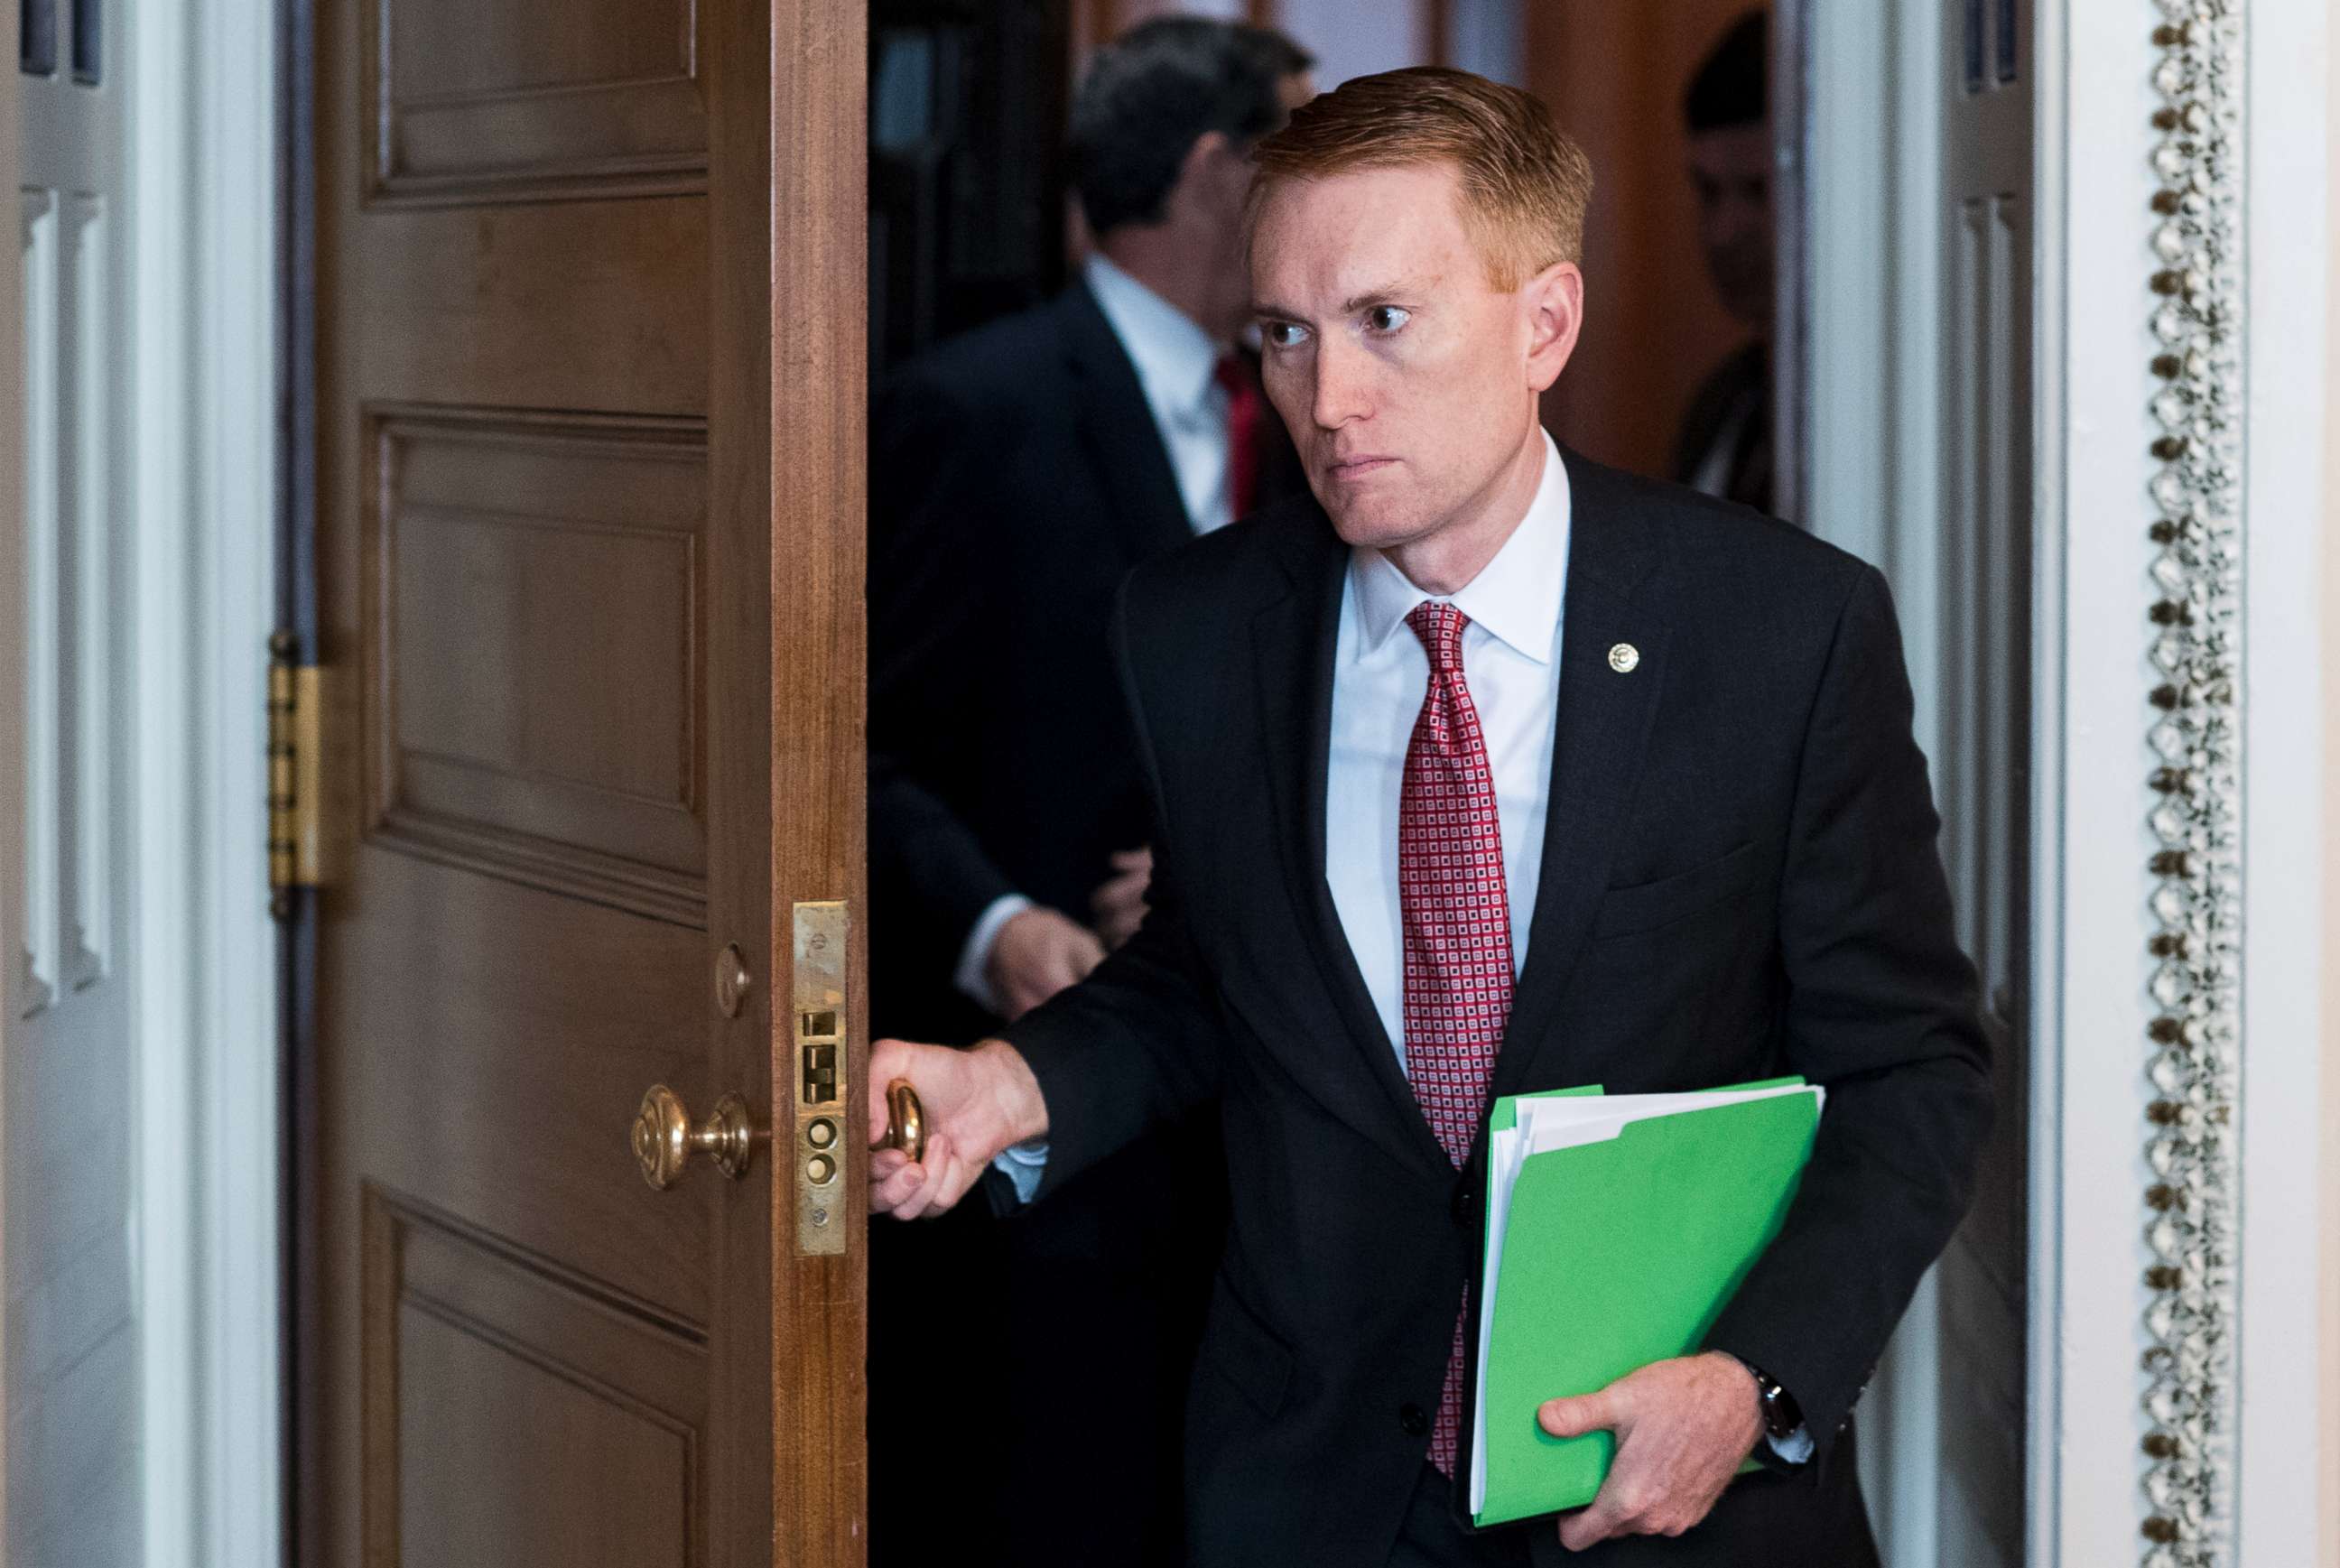 PHOTO: Sen. James Lankford leaves the Senate Republicans' policy lunch at the U.S. Capitol, June 6, 2017 in Washington, D.C.